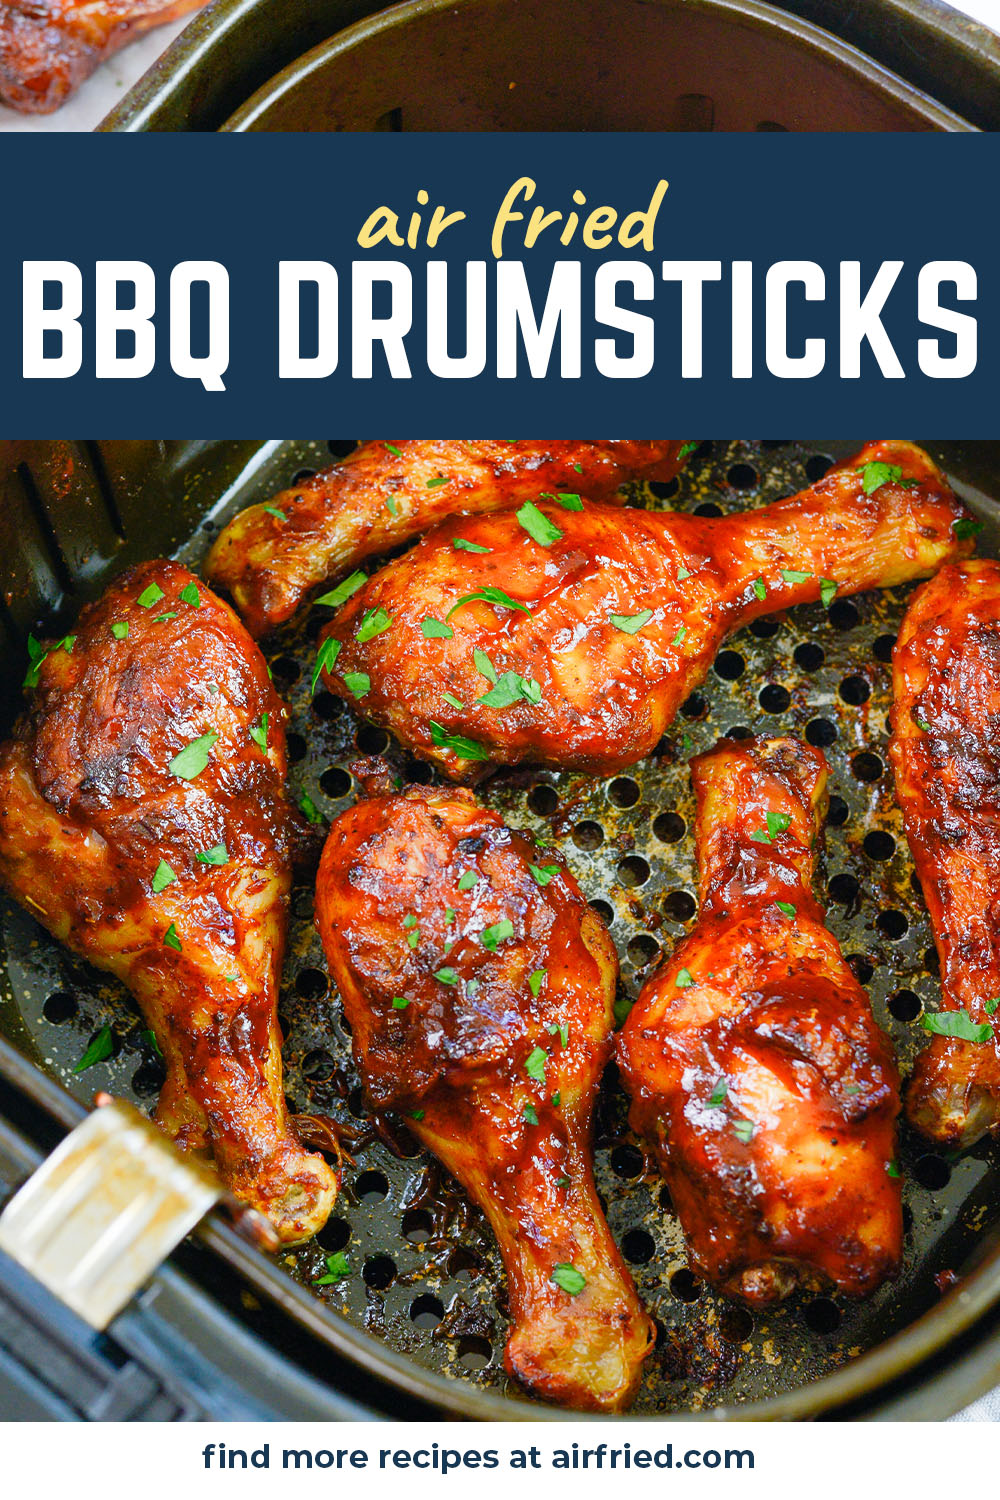 These air fryer BBQ drumsticks will quickly become a family fav!